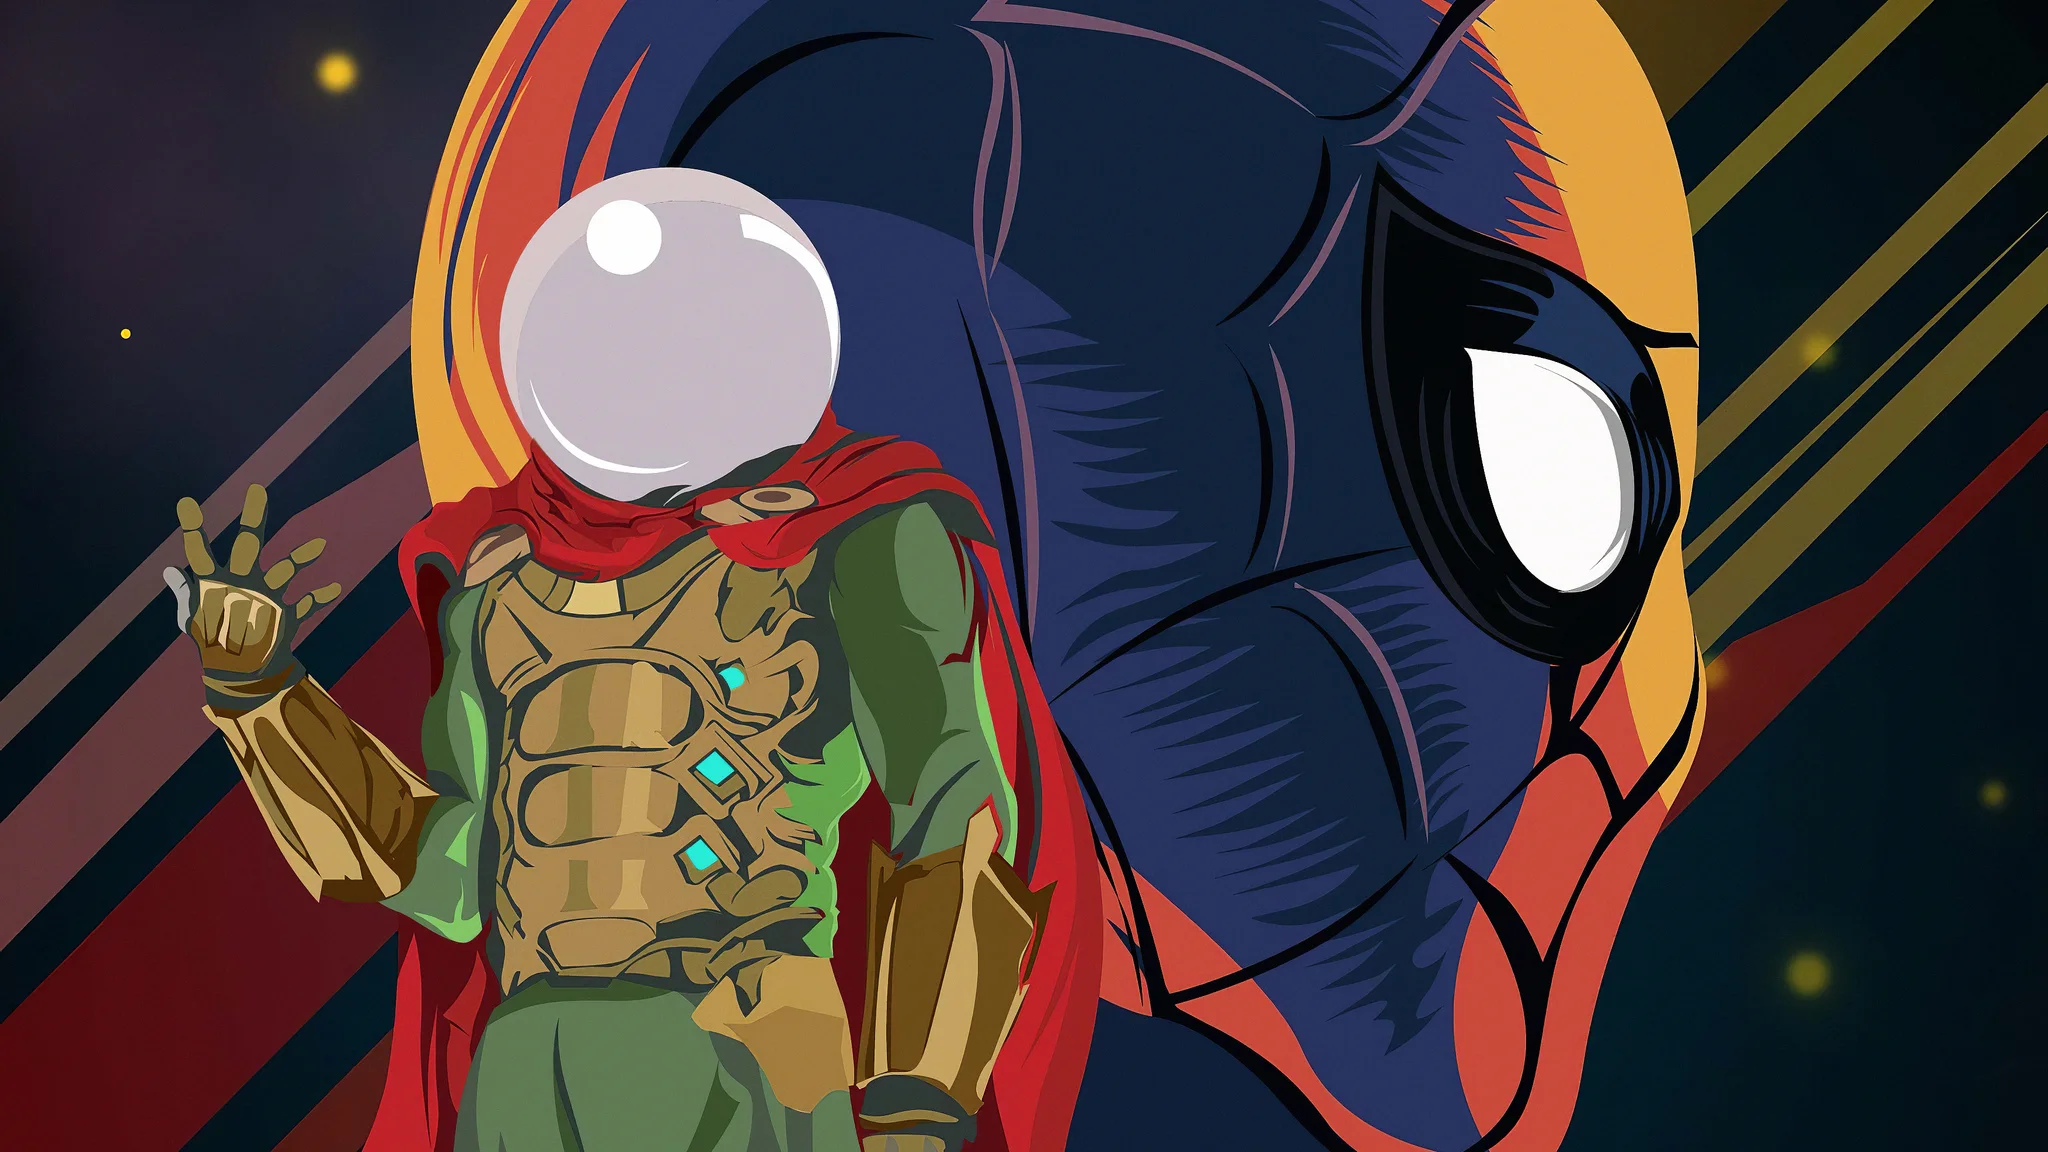 The recent Marvel's Spider-Man 2 trailer may have shown Mysterio